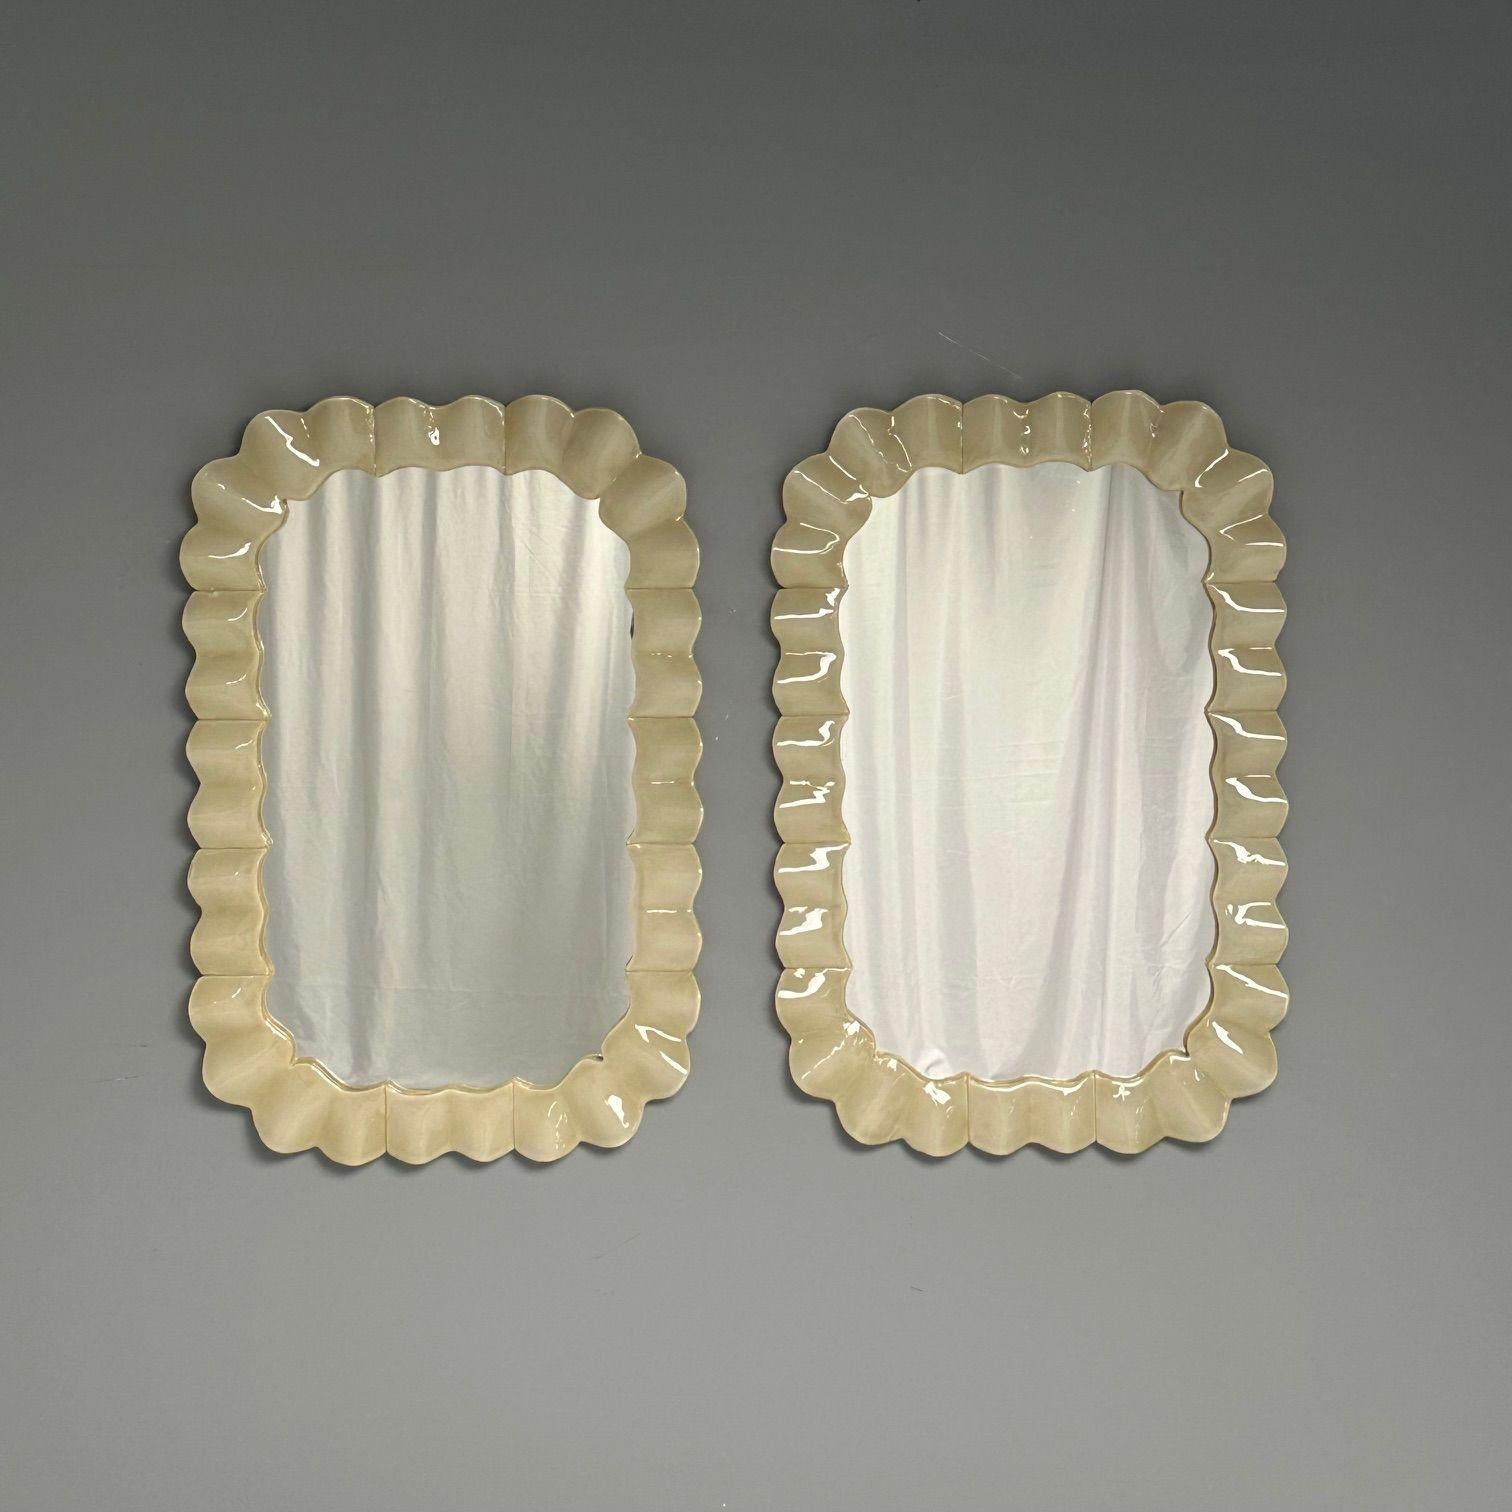 Contemporary, Ruffle Wall Mirrors, White Murano Glass, Brass, Italy, 2023 For Sale 2